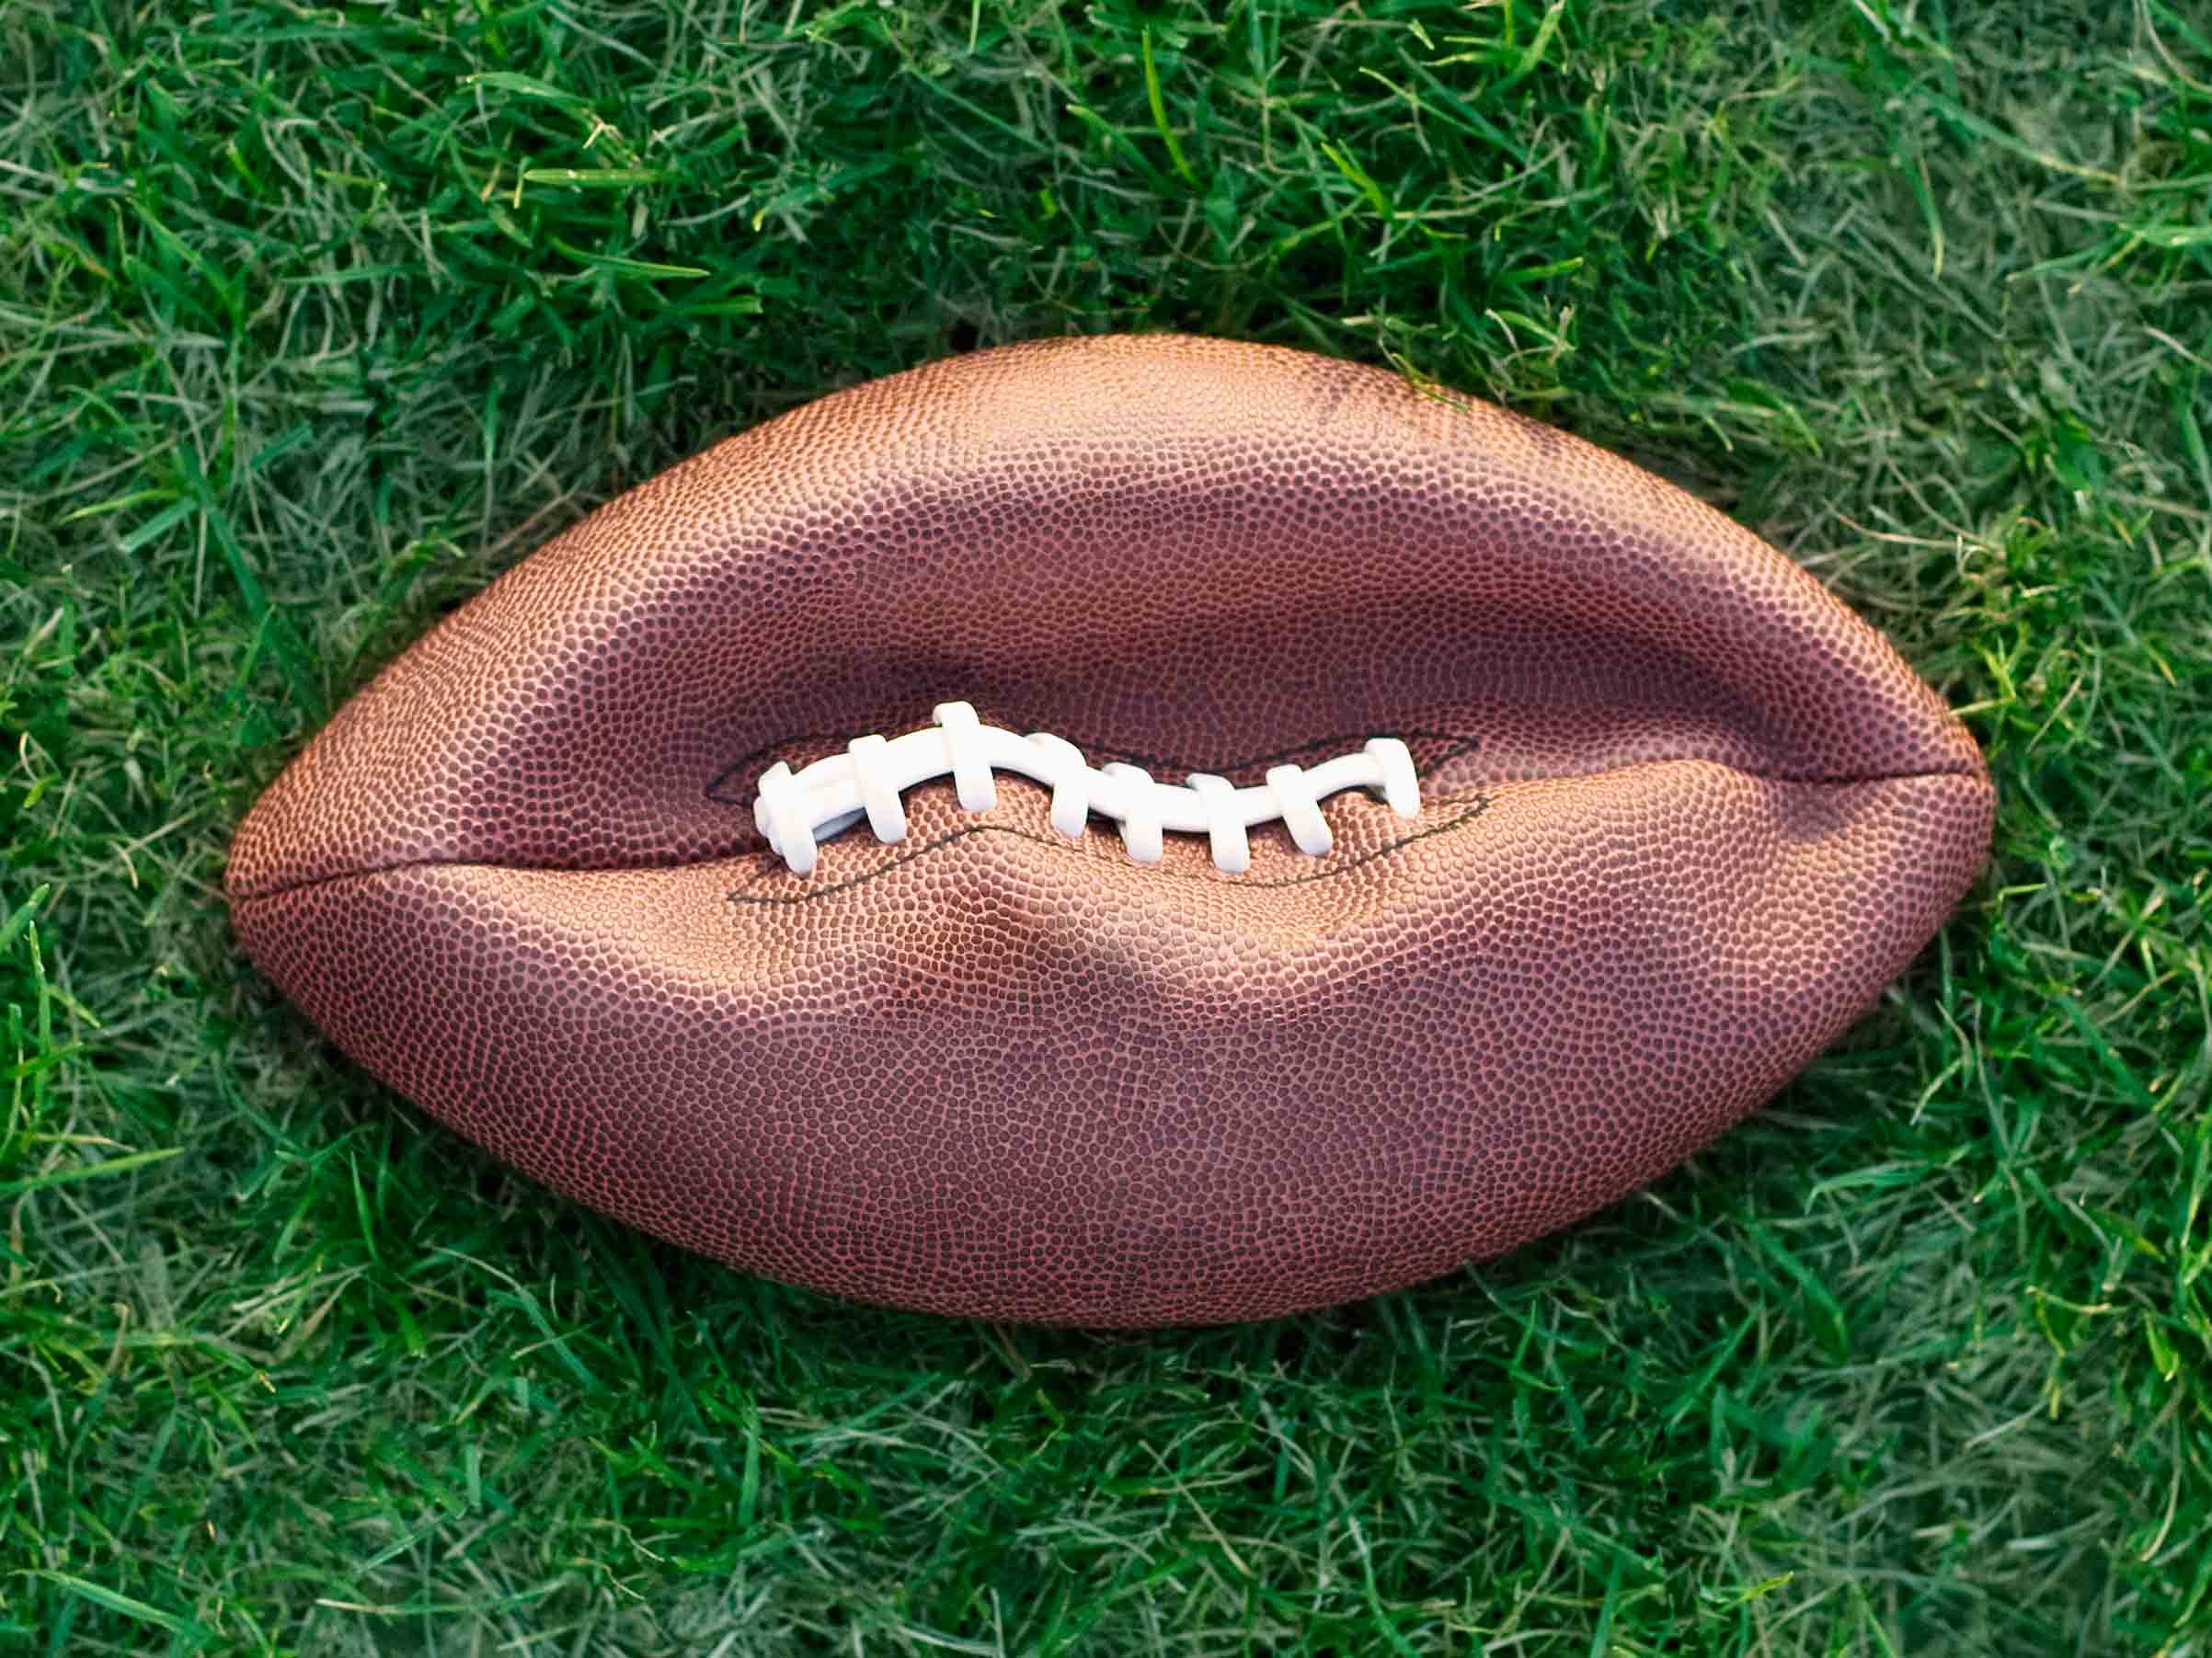 Deflated American football on grass (Steven Puetzer—Getty Images)